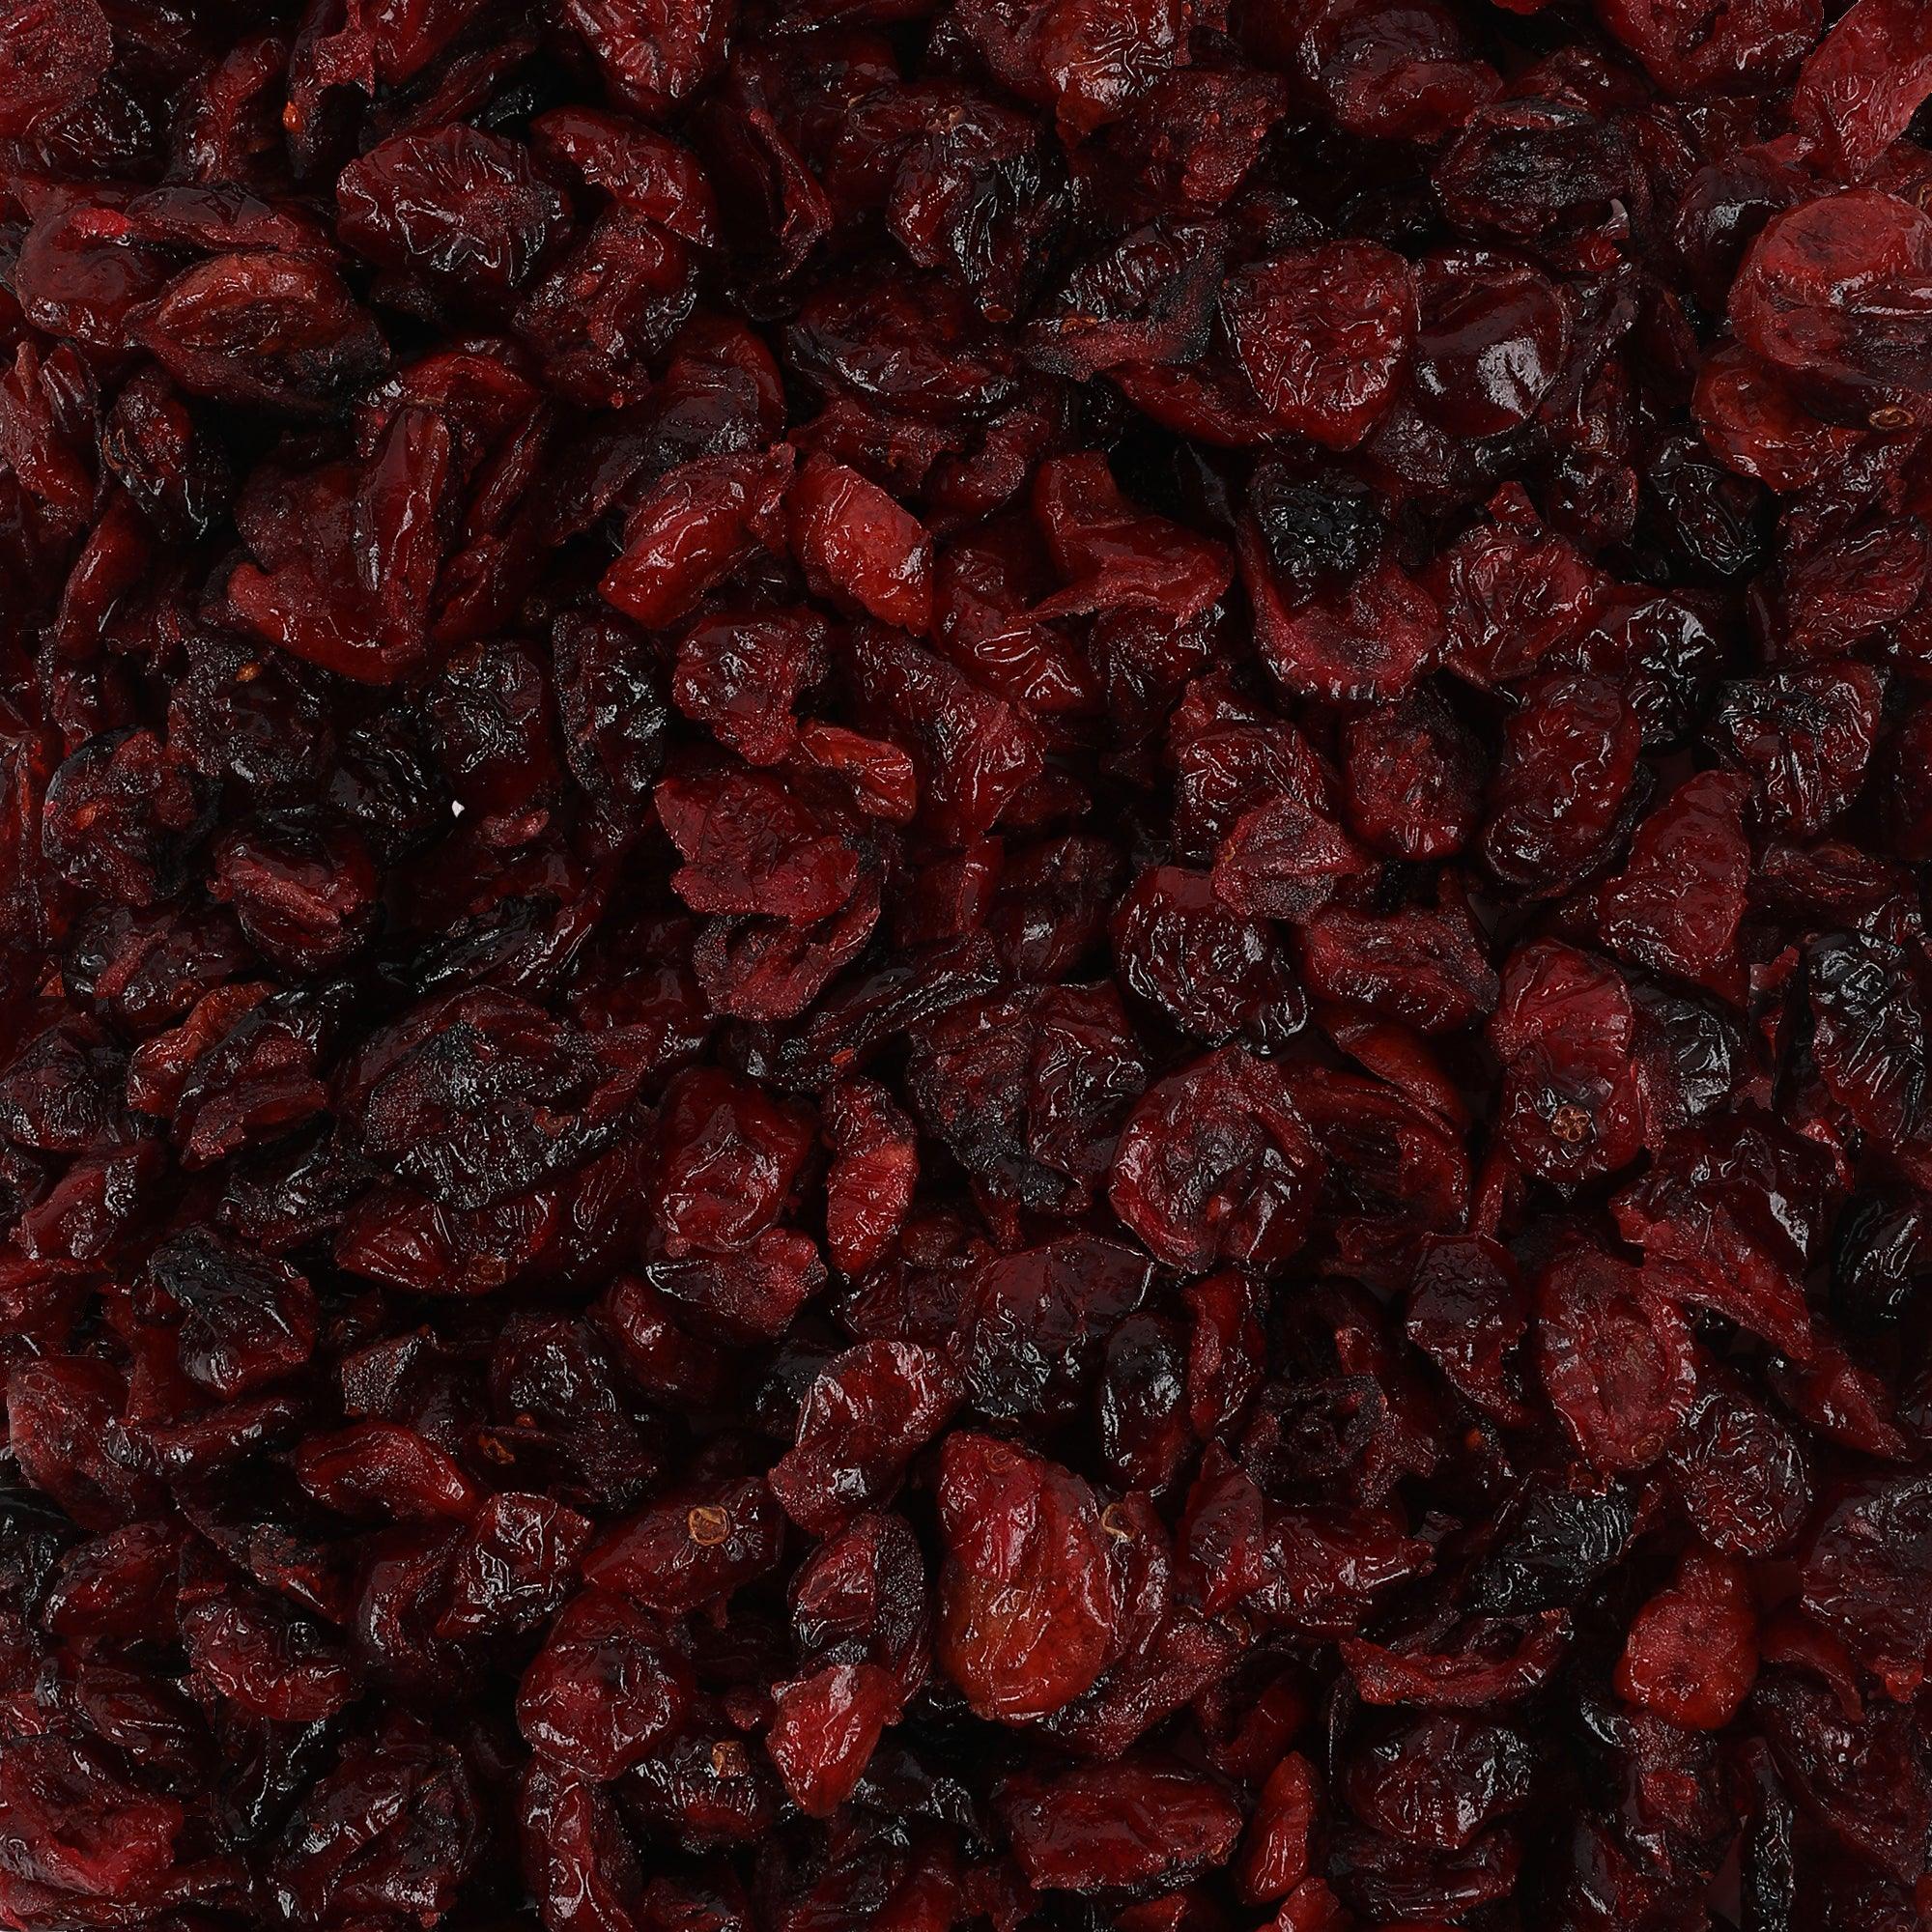 Premium quality dehydrated cranberries available online